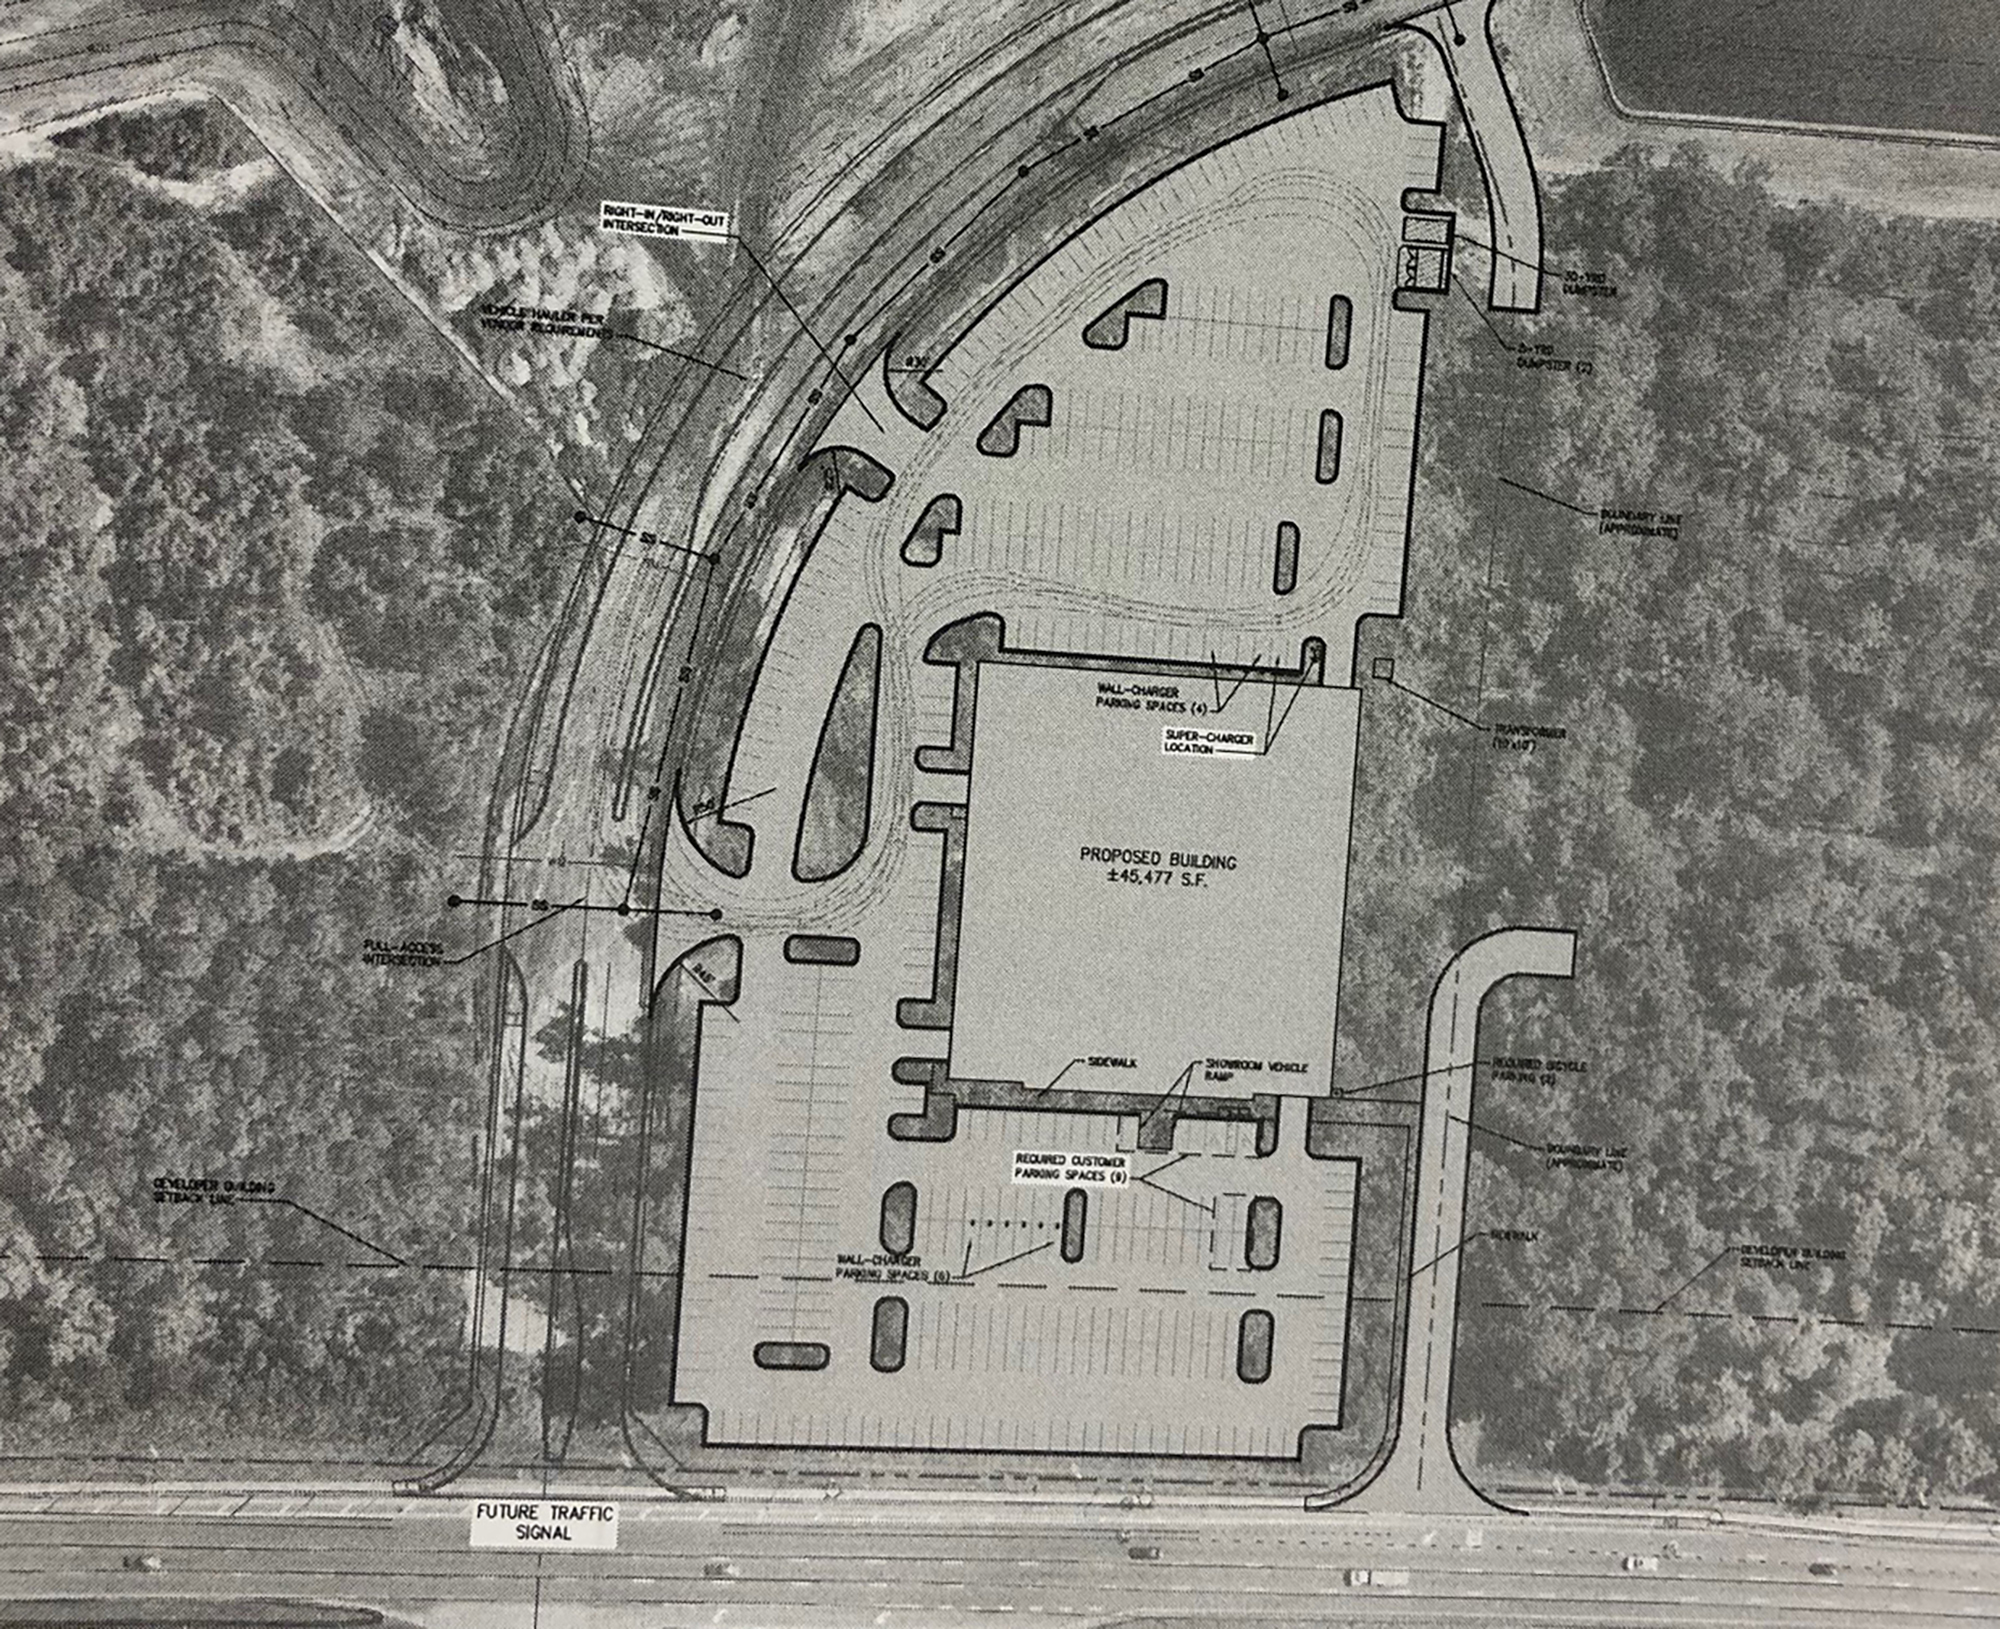 The site plan for the electric vehicle showroom.